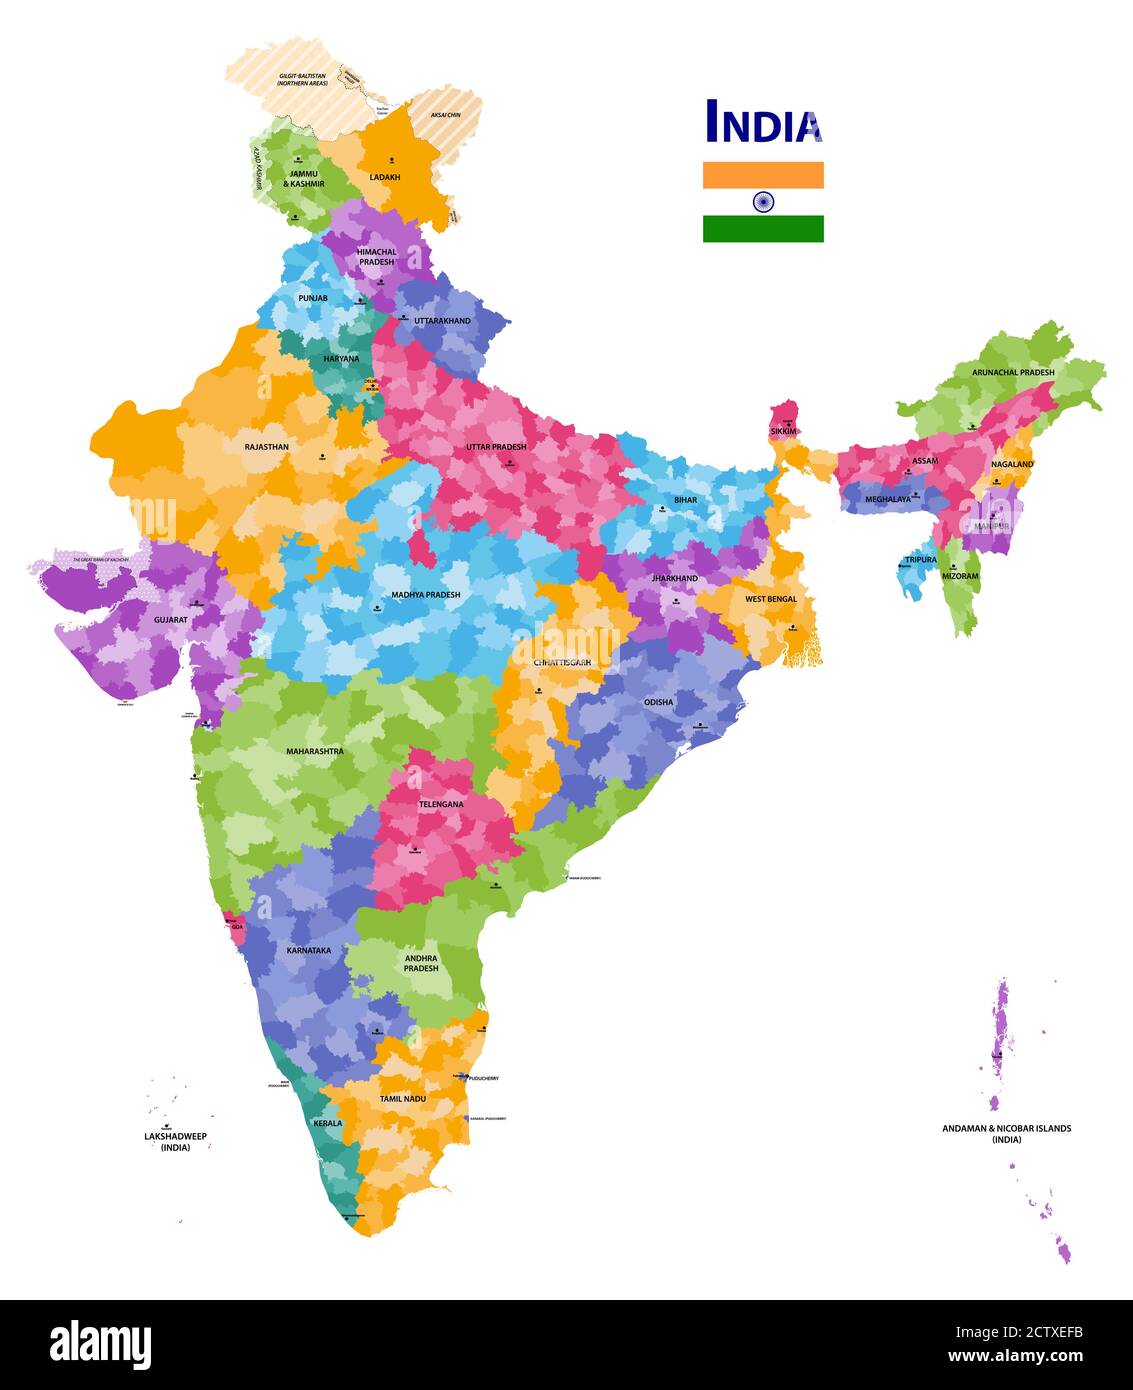 India high detailed vector map showing states and districts boundaries with states' names and capitals. Flag of India Stock Vector